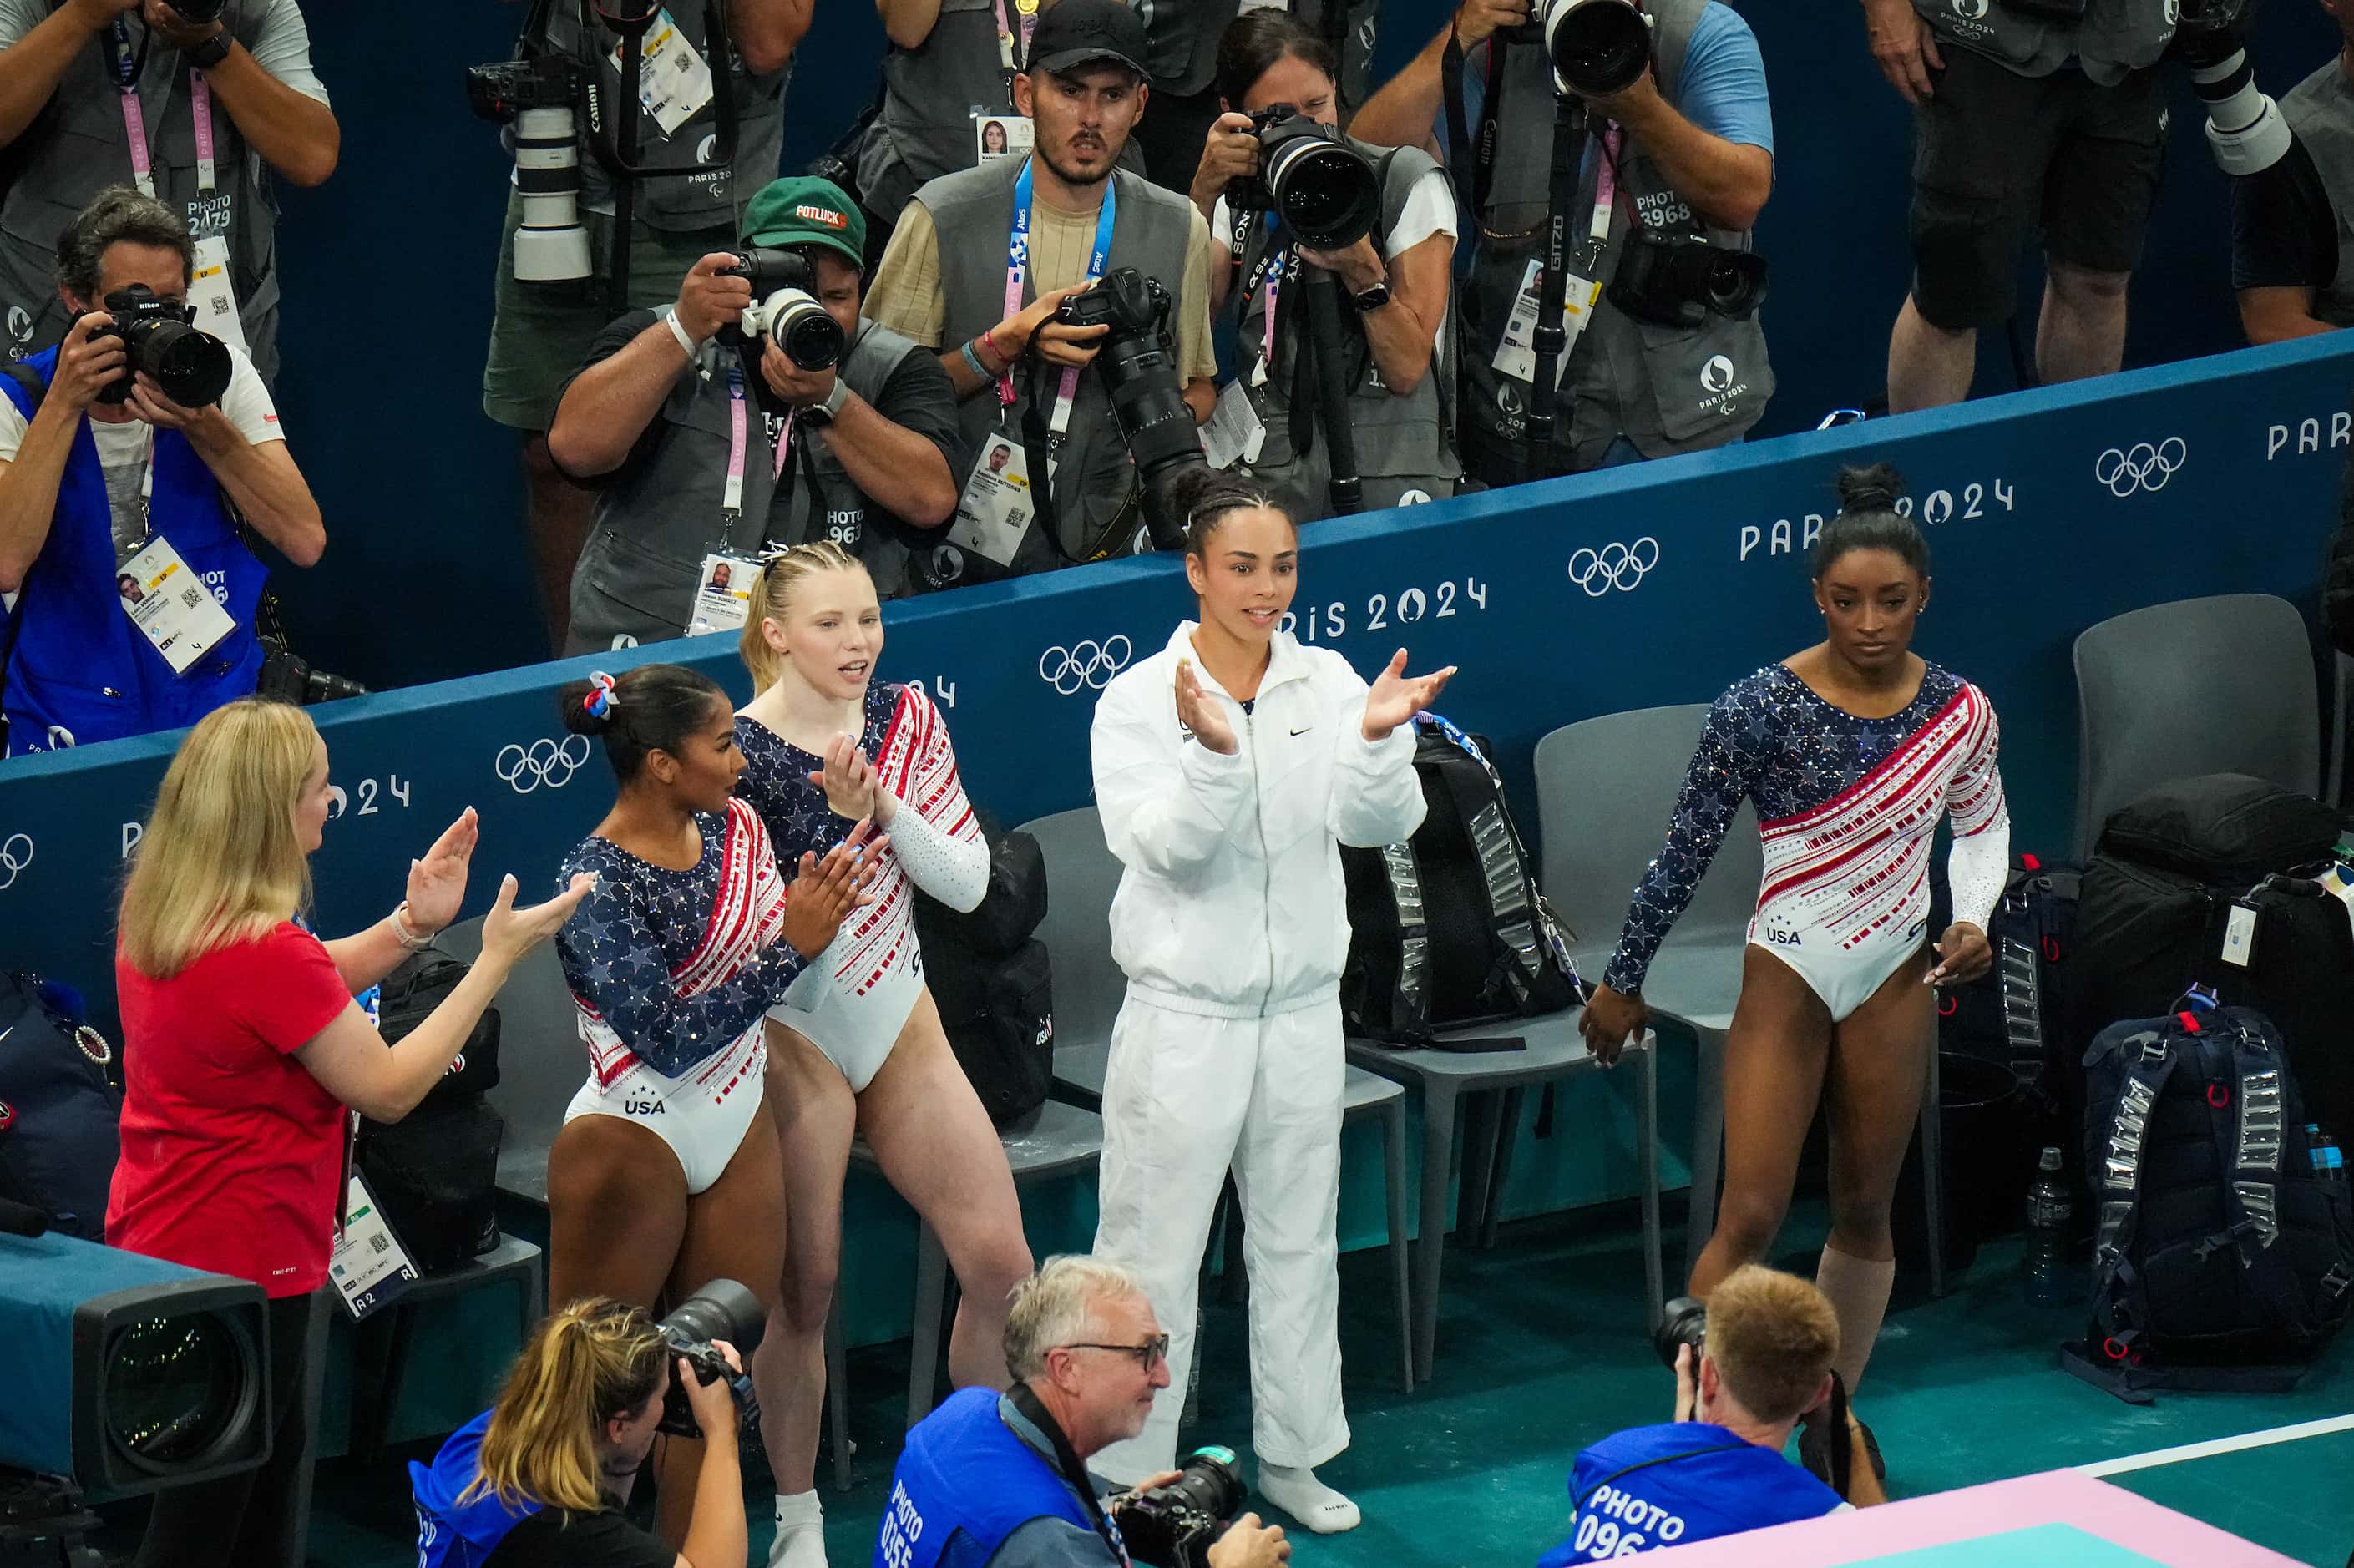 From left, coach Cecile Landi, Jordan Chiles, Jade Carey, Hezly Rivera and Simone Biles...